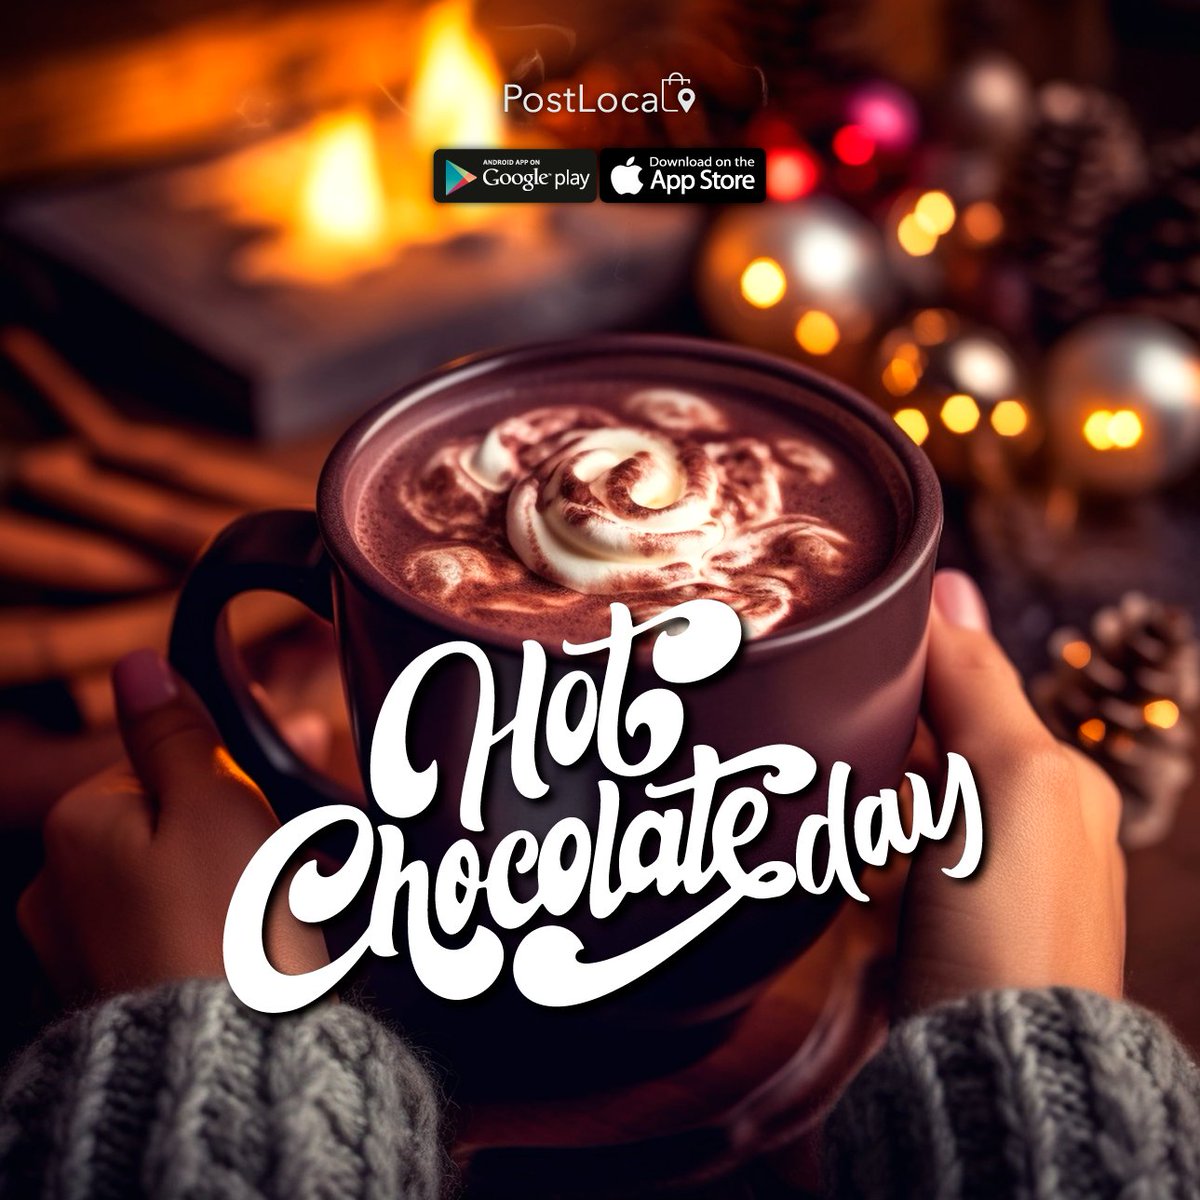 🎉 Raise your mugs, it's National Hot Chocolate Day! ☕🍫 Dive into a world of velvety bliss with our premium hot chocolate blends. We've got the perfect cup to warm your soul. Tag your cocoa crew and let the celebration brew! #NationalHotChocolateDay #CocoaCheers